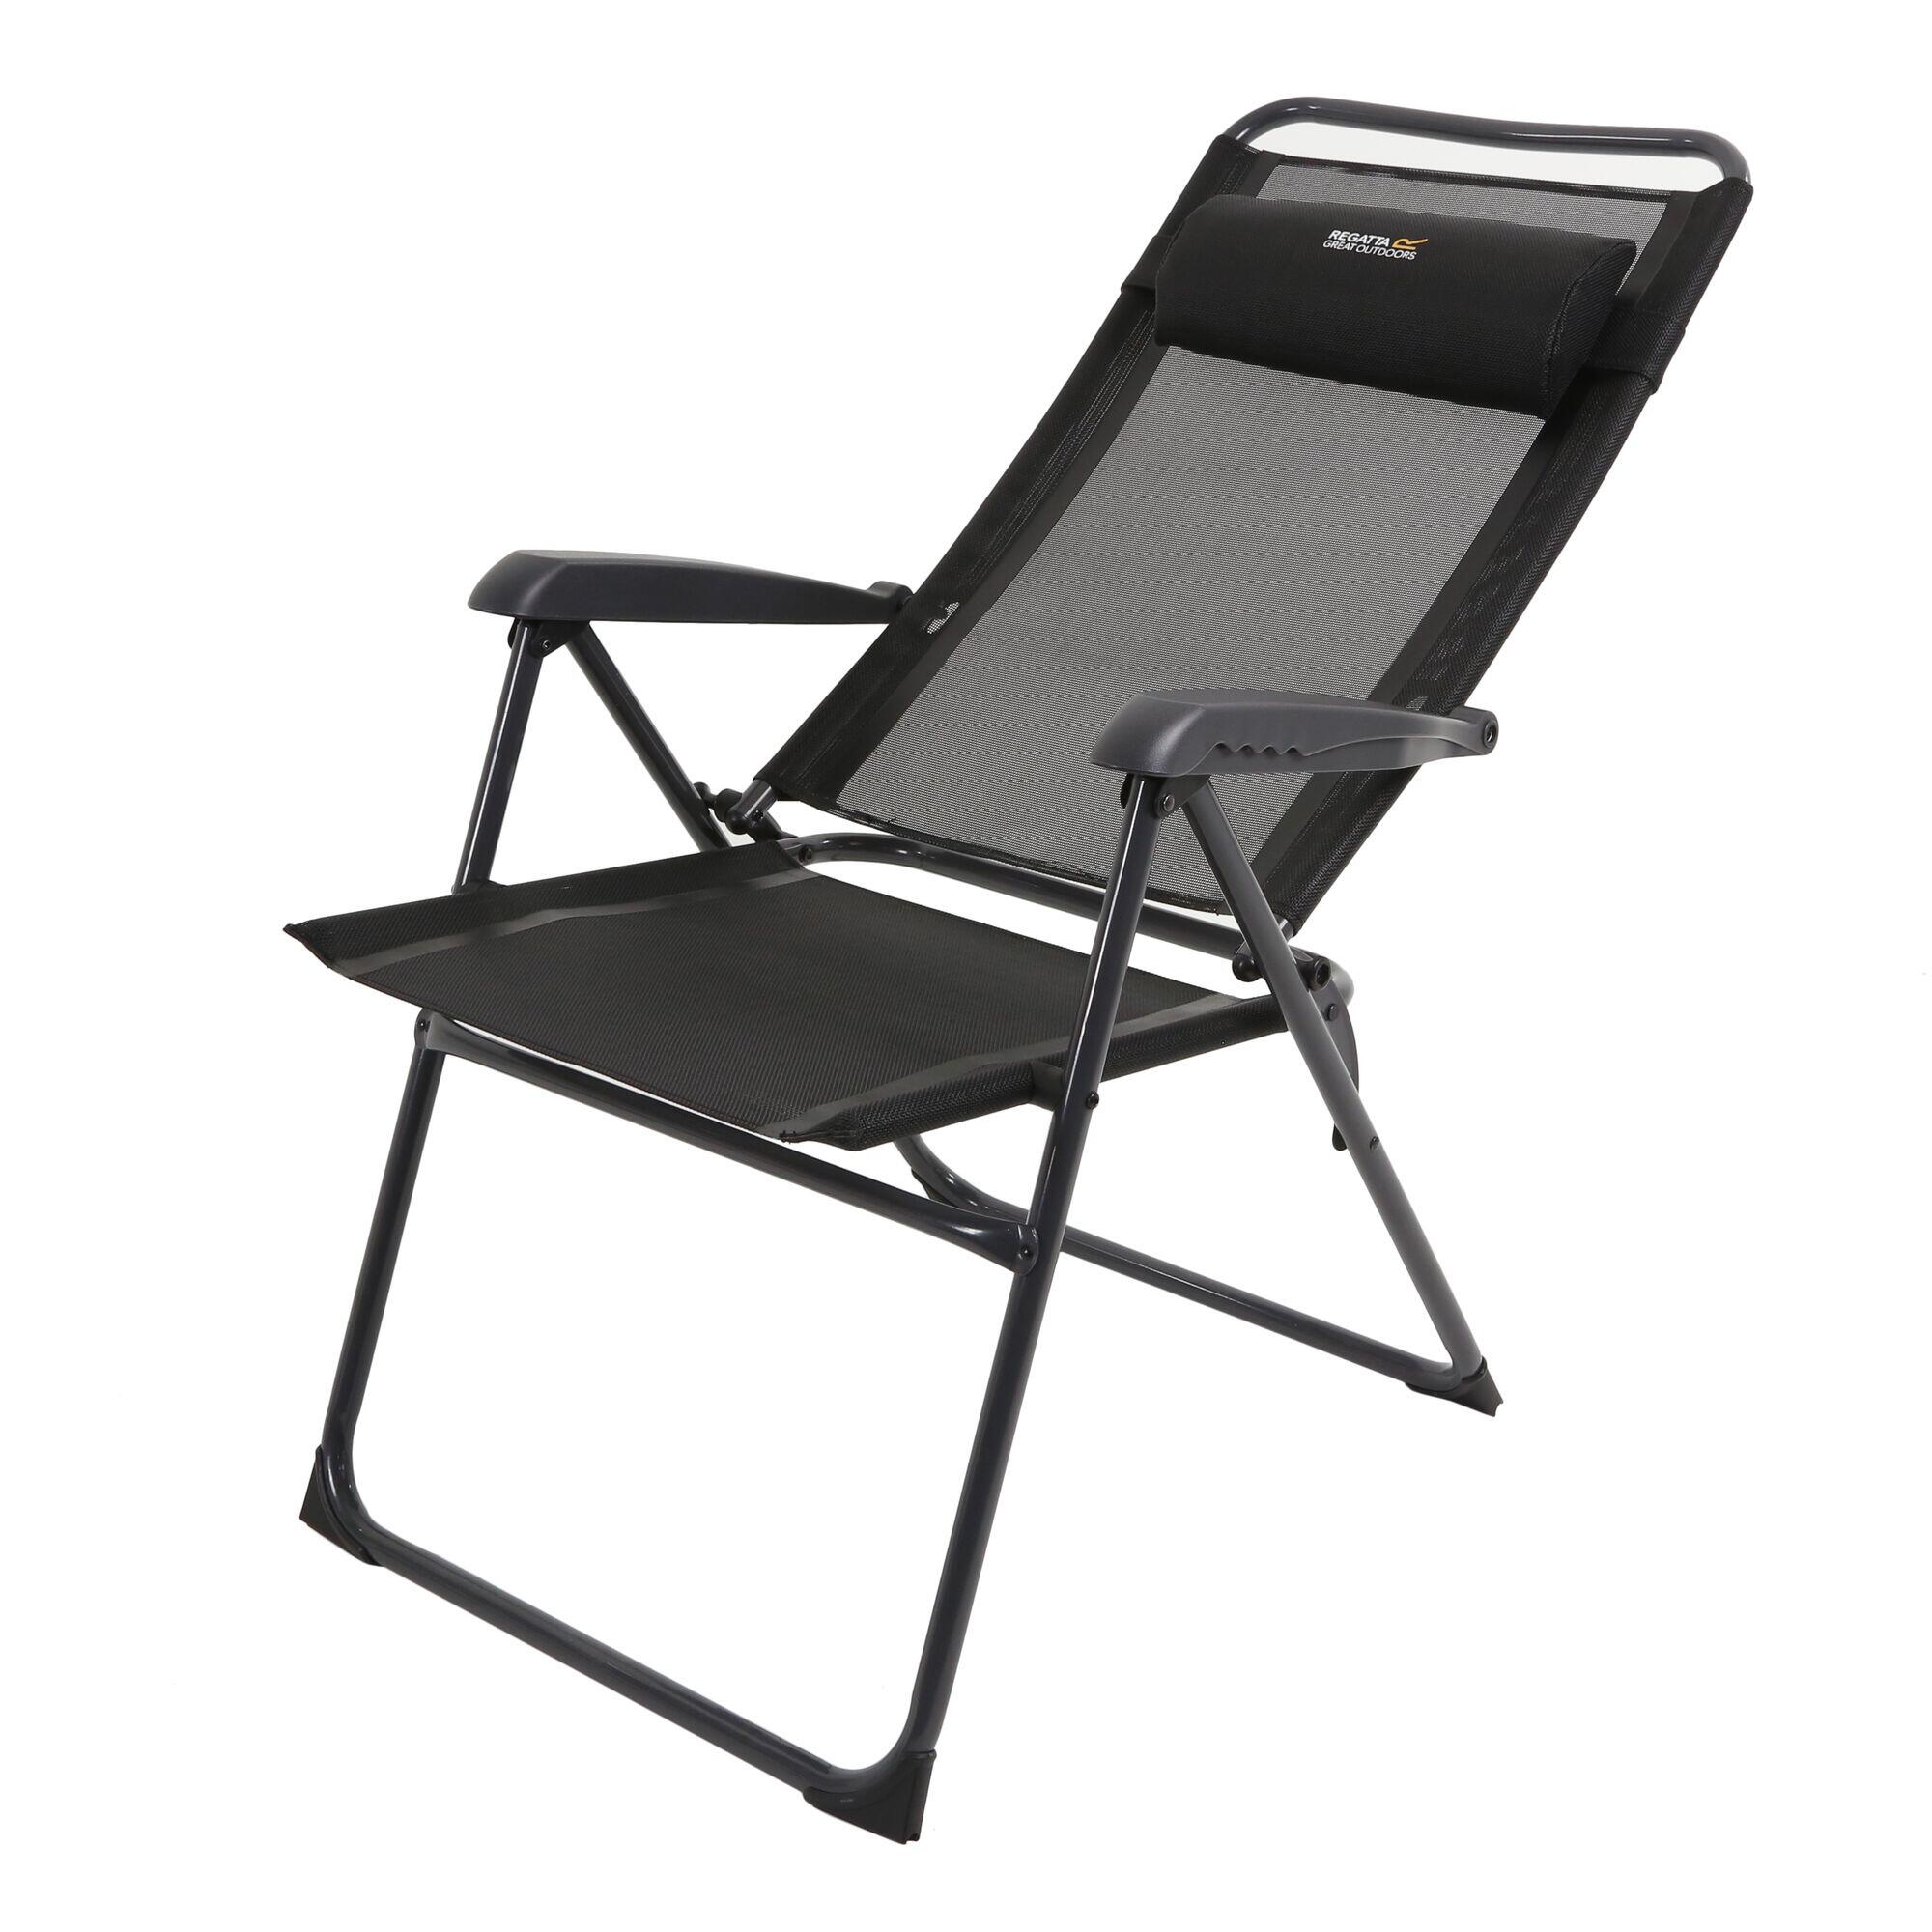 Colico Adults' Camping Chair - Black 2/5